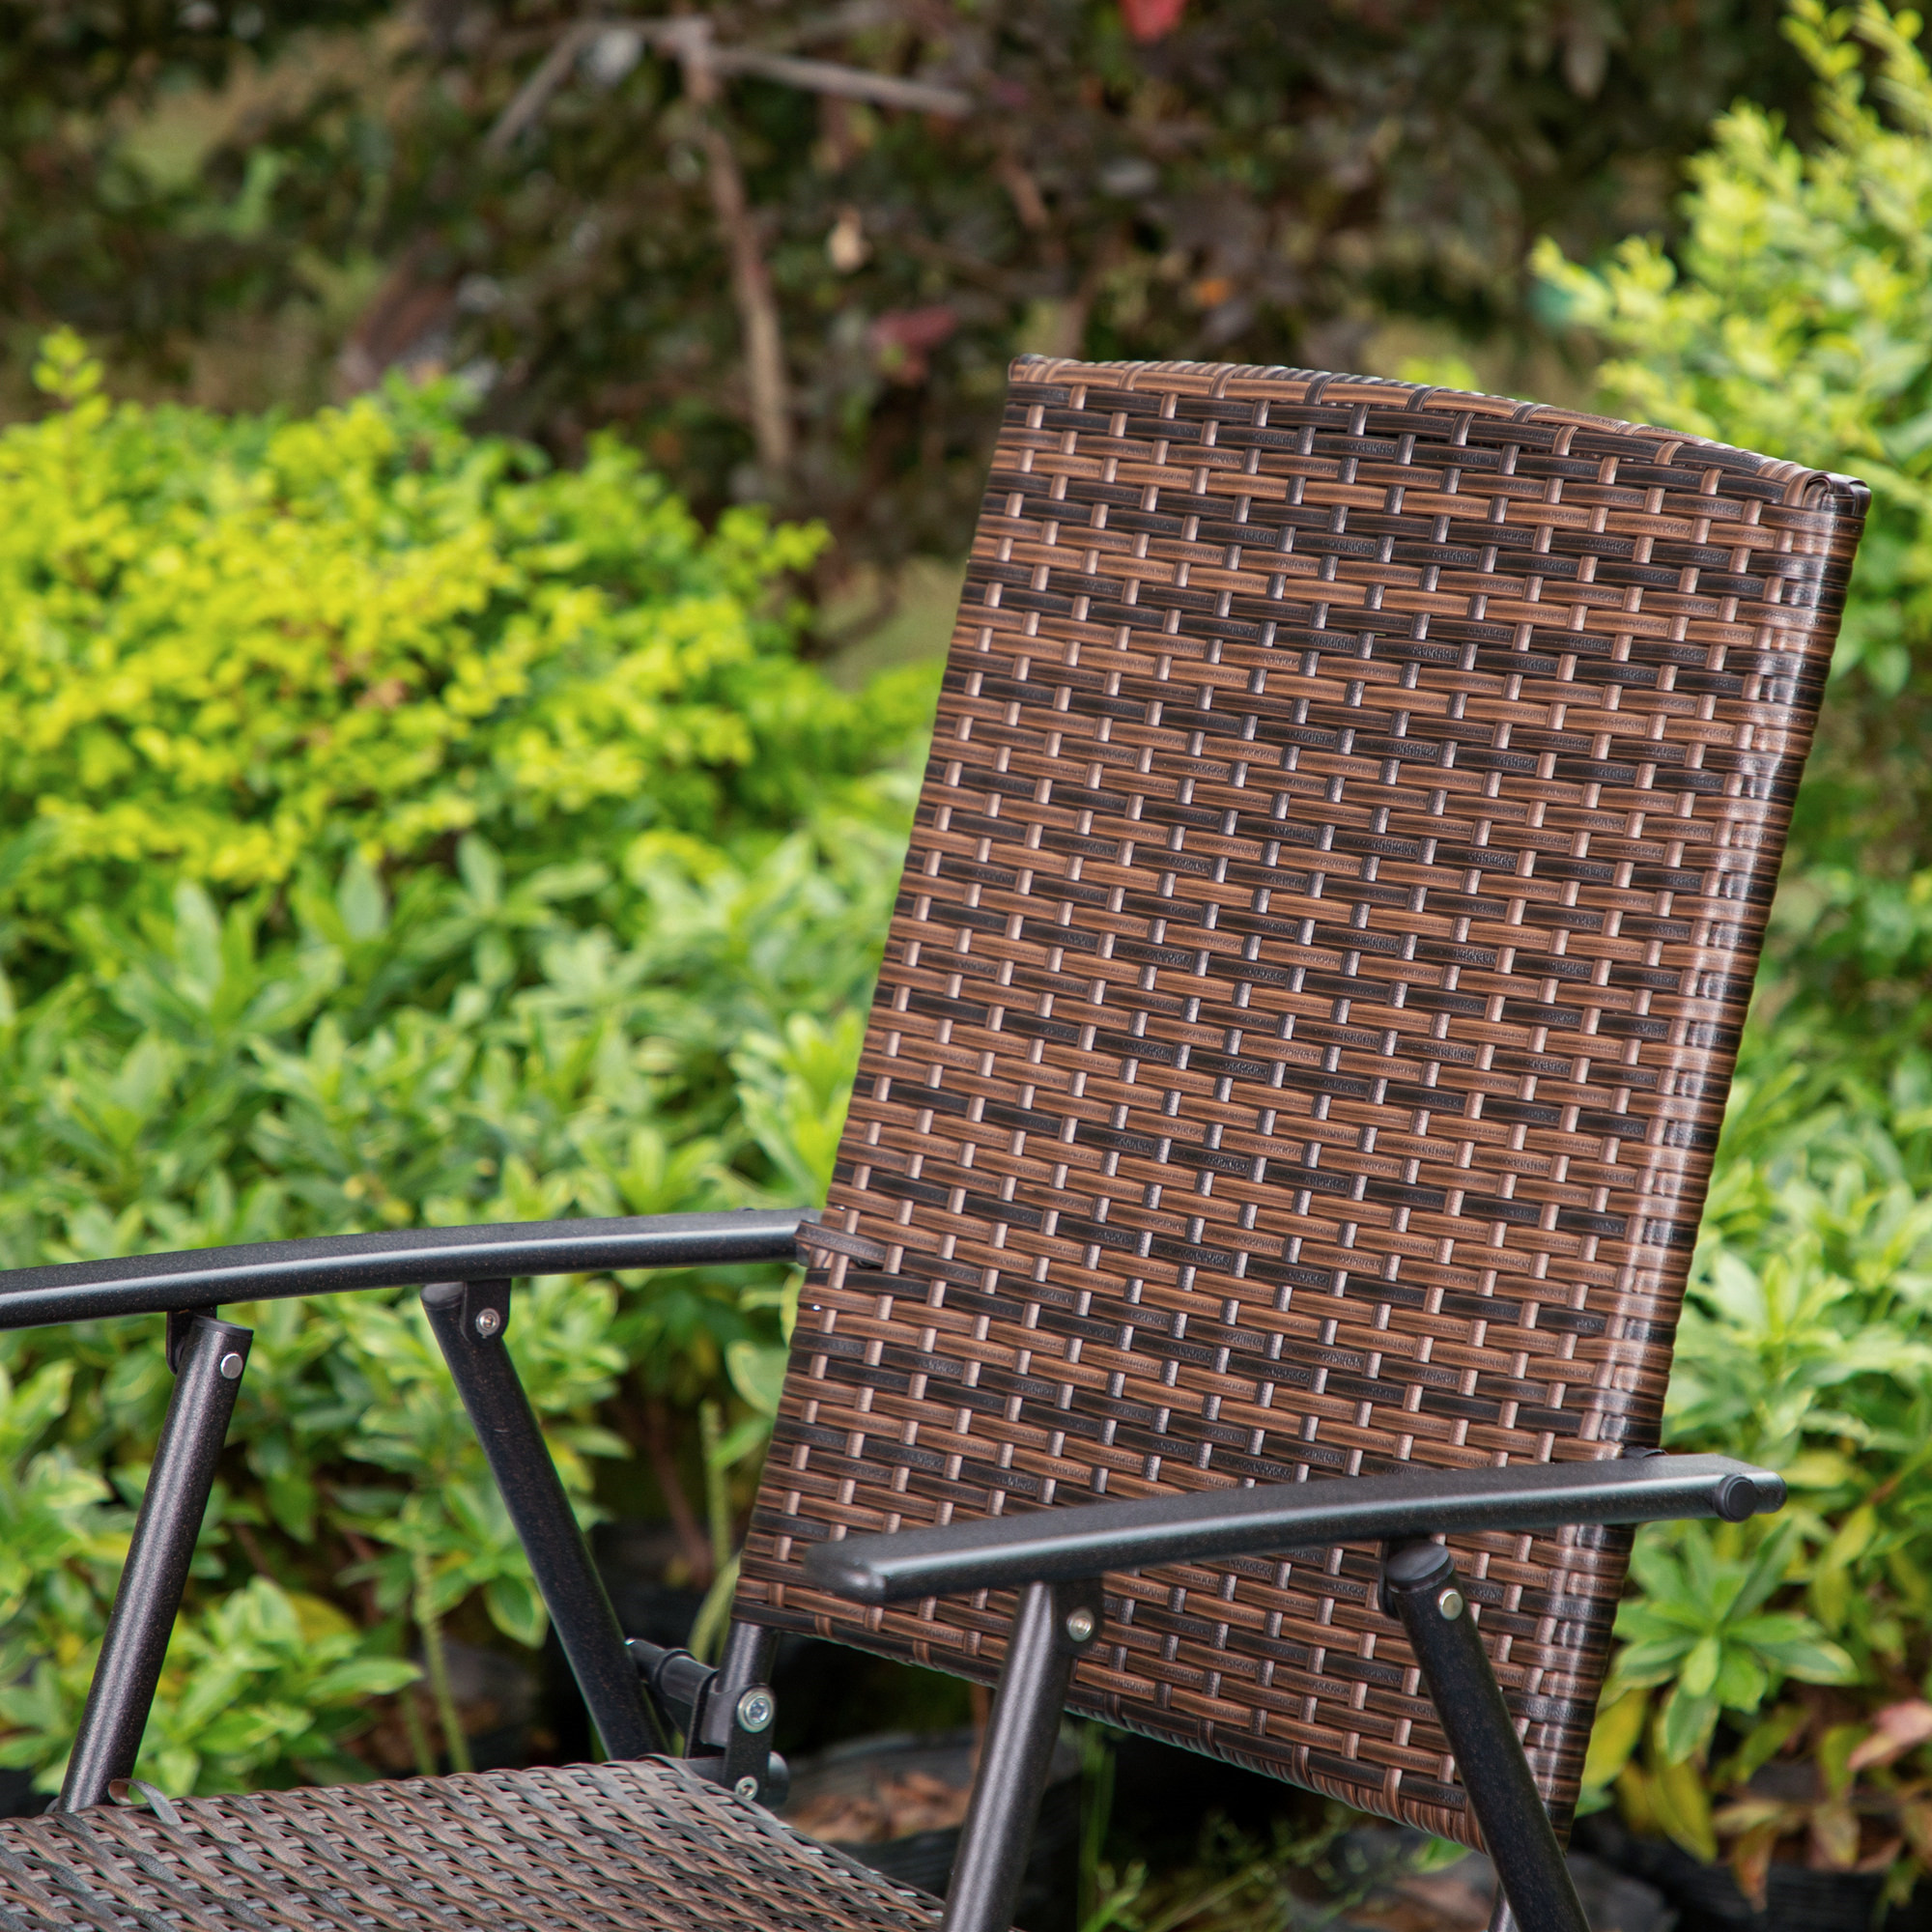 MF Studio 5-Piece Patio Dining Set with Wicker Folding Chairs for 4-Person, Brown&Black - image 5 of 13